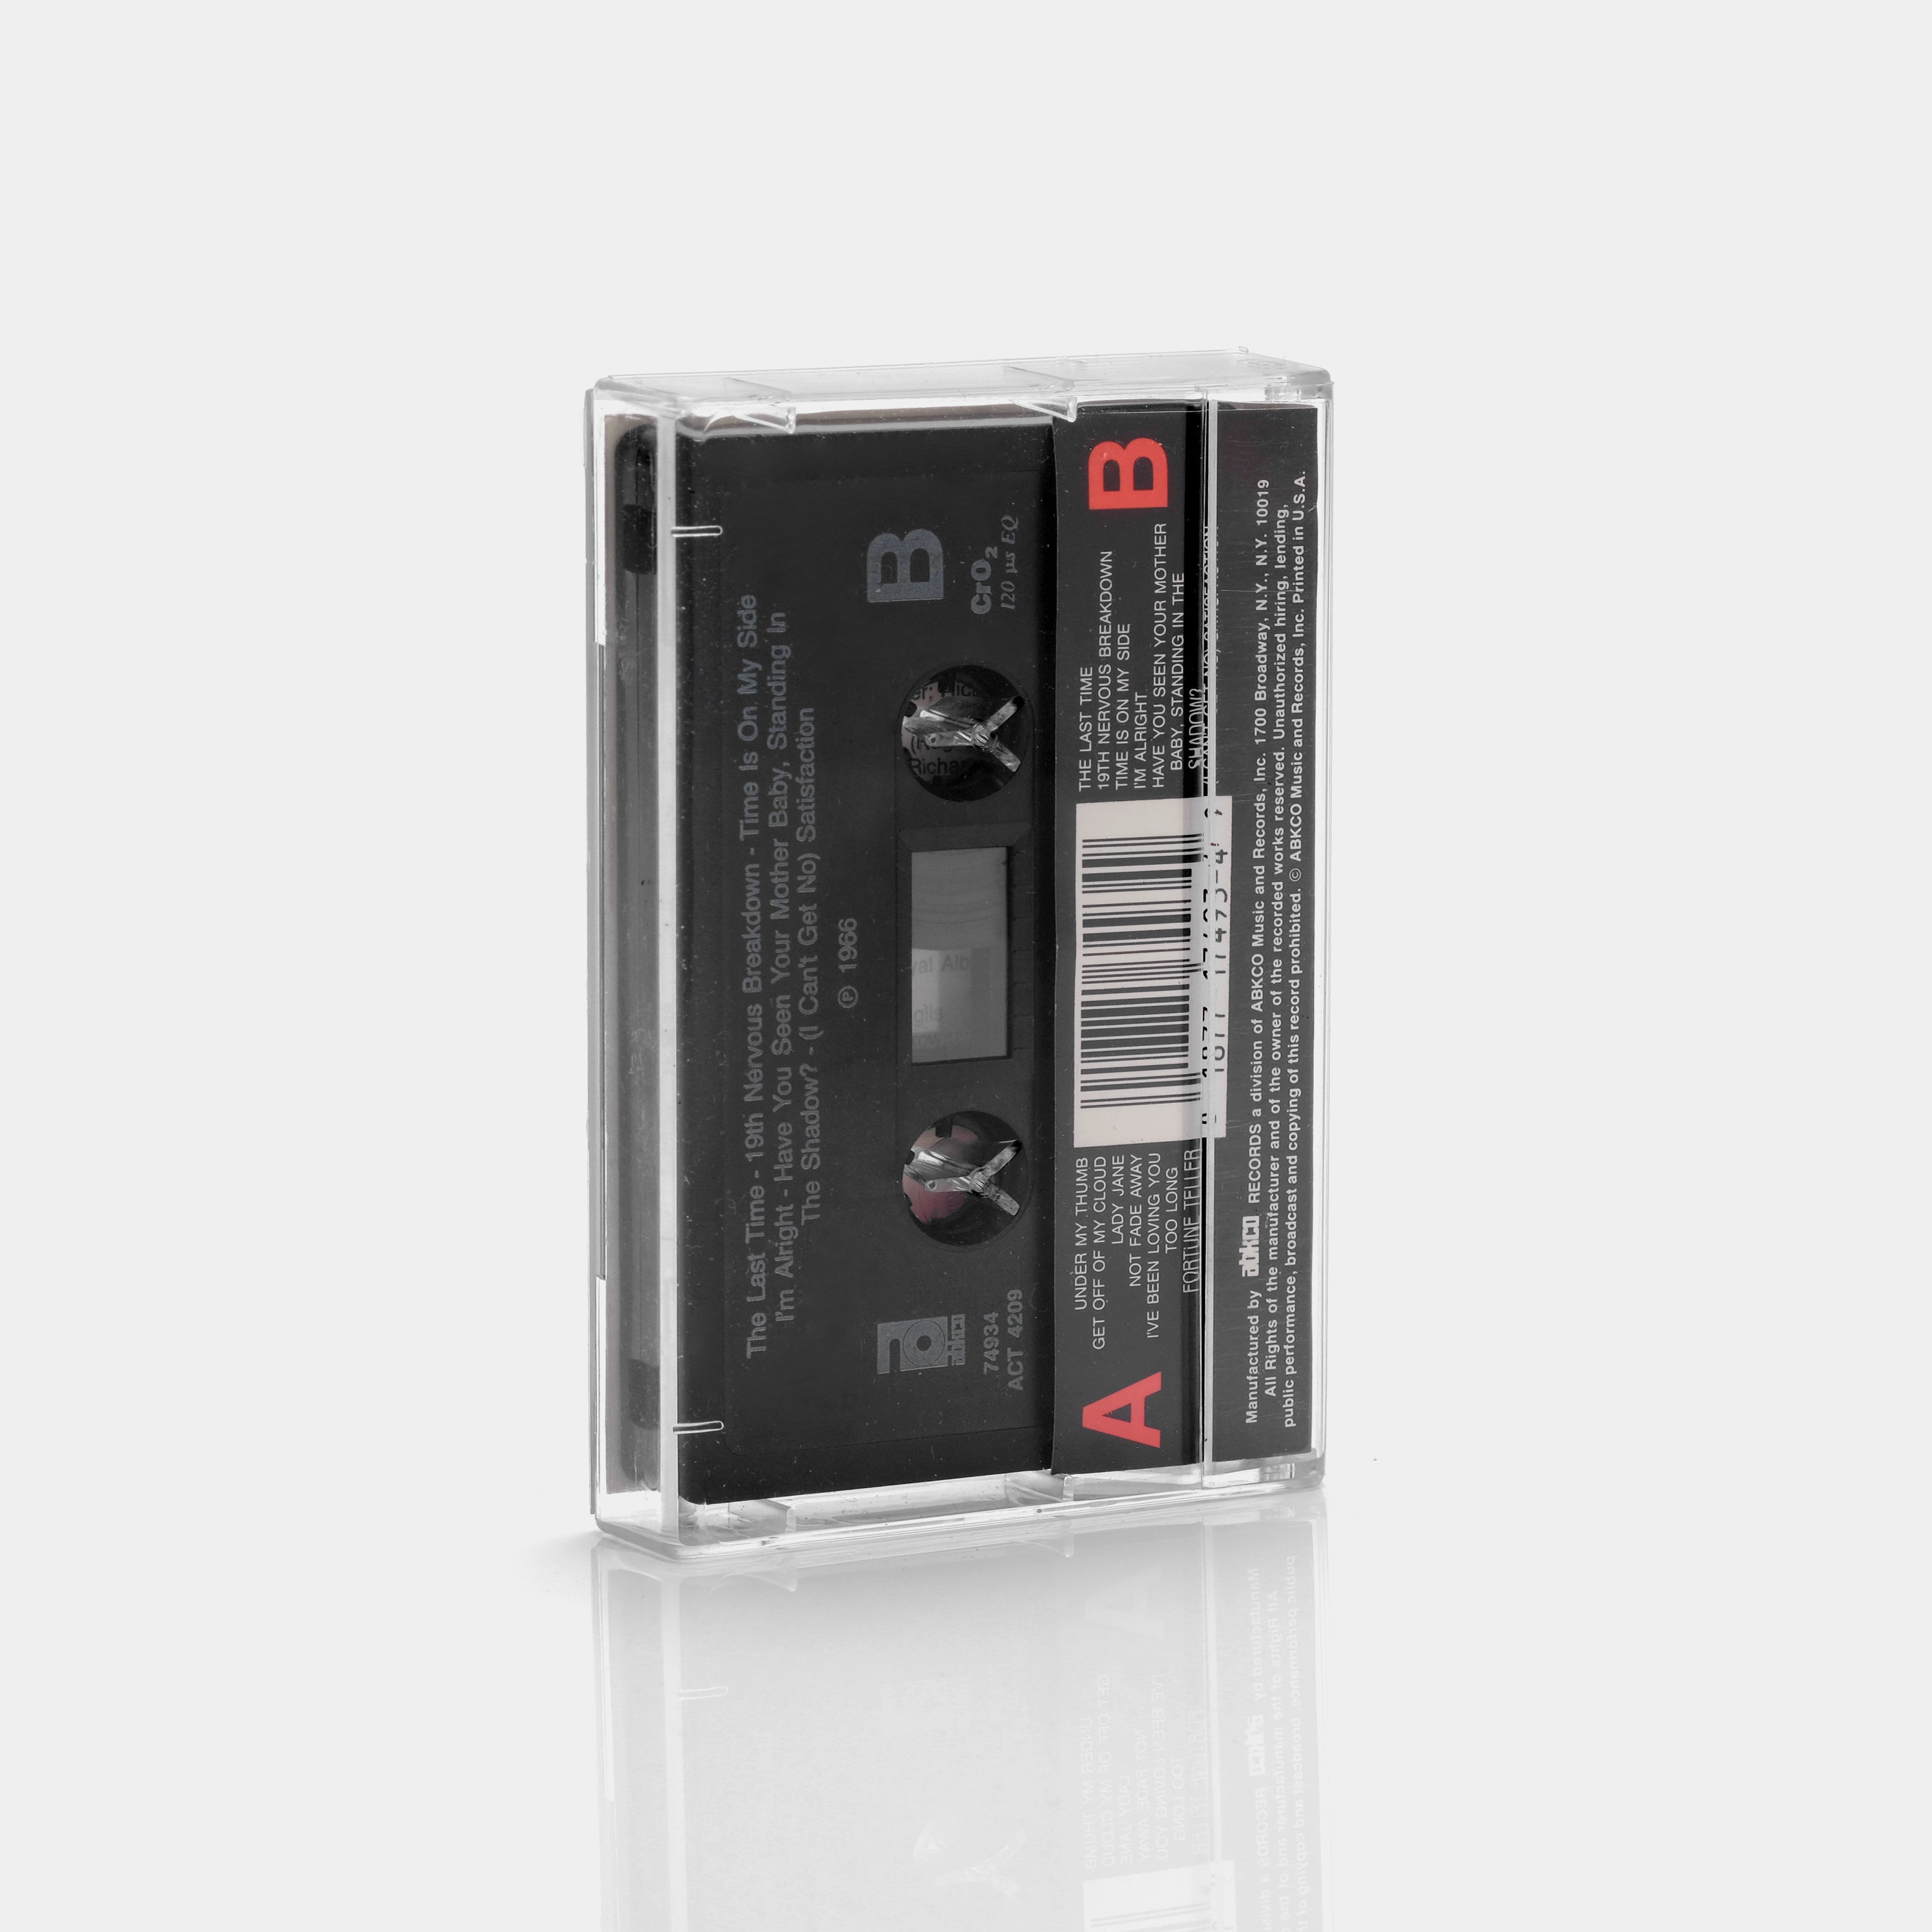 The Rolling Stones - got LIVE if you want it! Cassette Tape